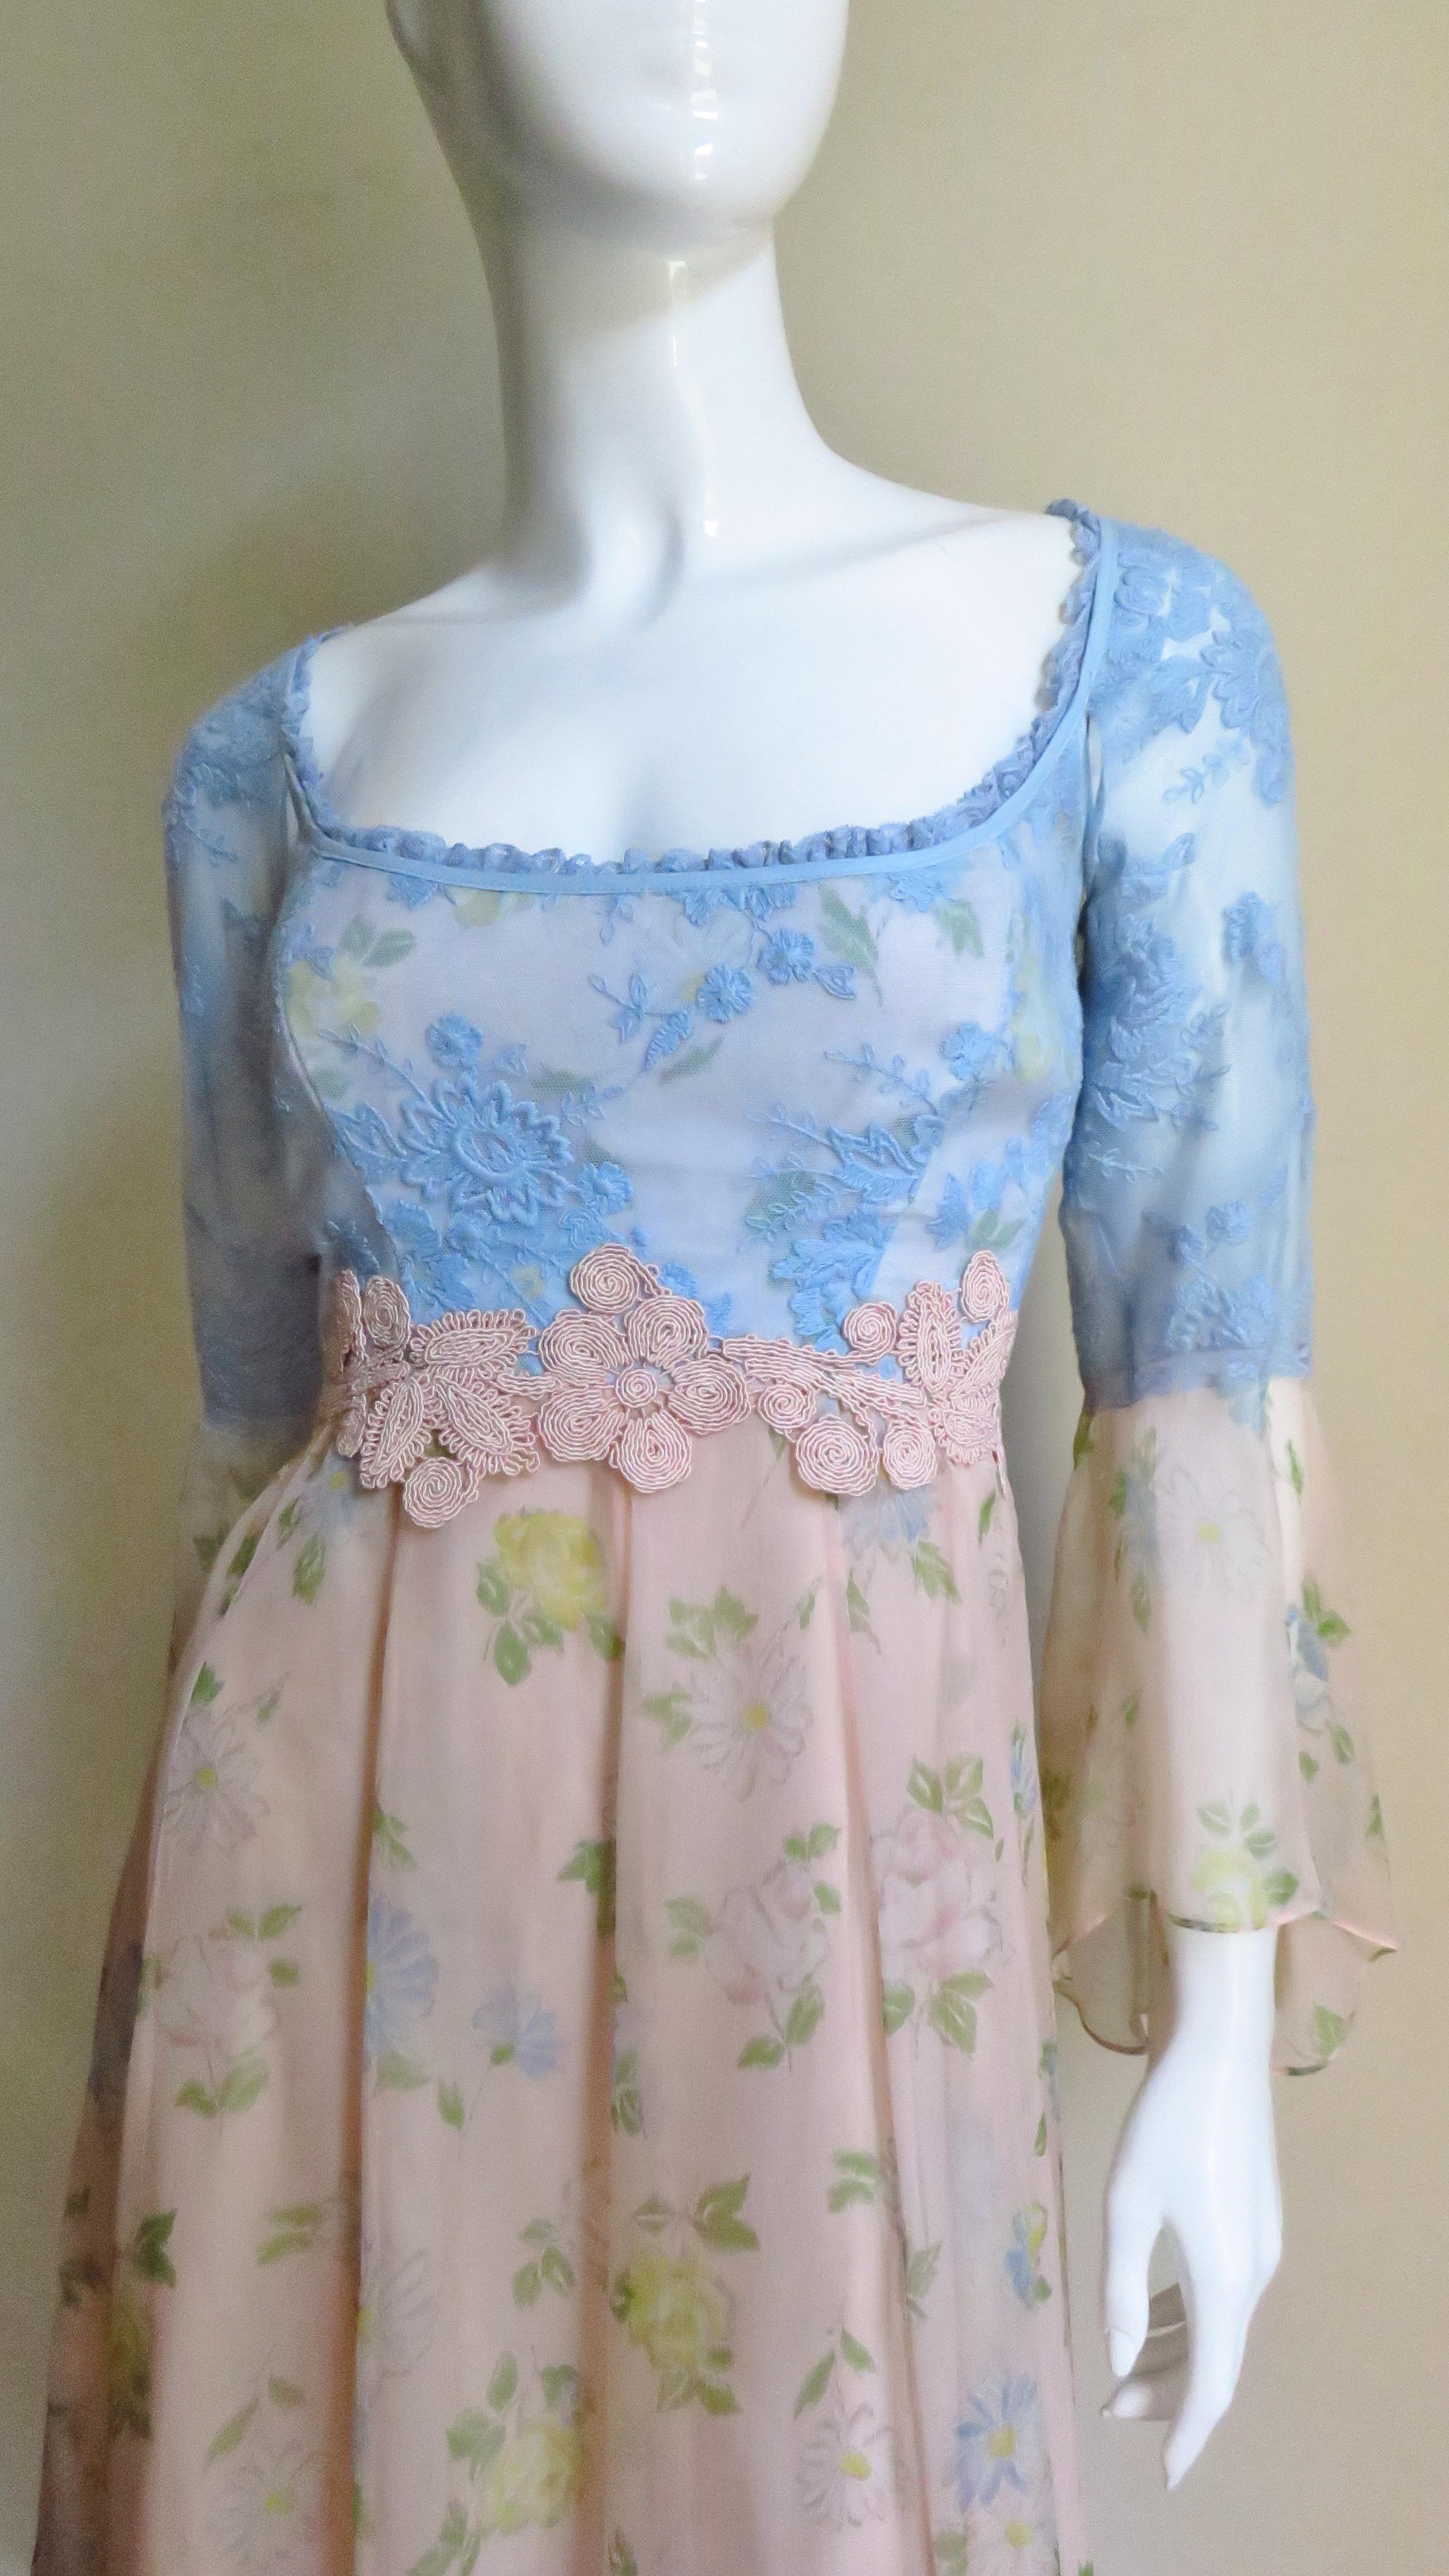 A beautiful ethereal blue and peach silk dress from French designer Lolita Lempicka.  A great combination of a blue lace fitted bodice and upper sleeves with a light peach silk with a yellow and blue flower pattern skirt and lower bell sleeves. The